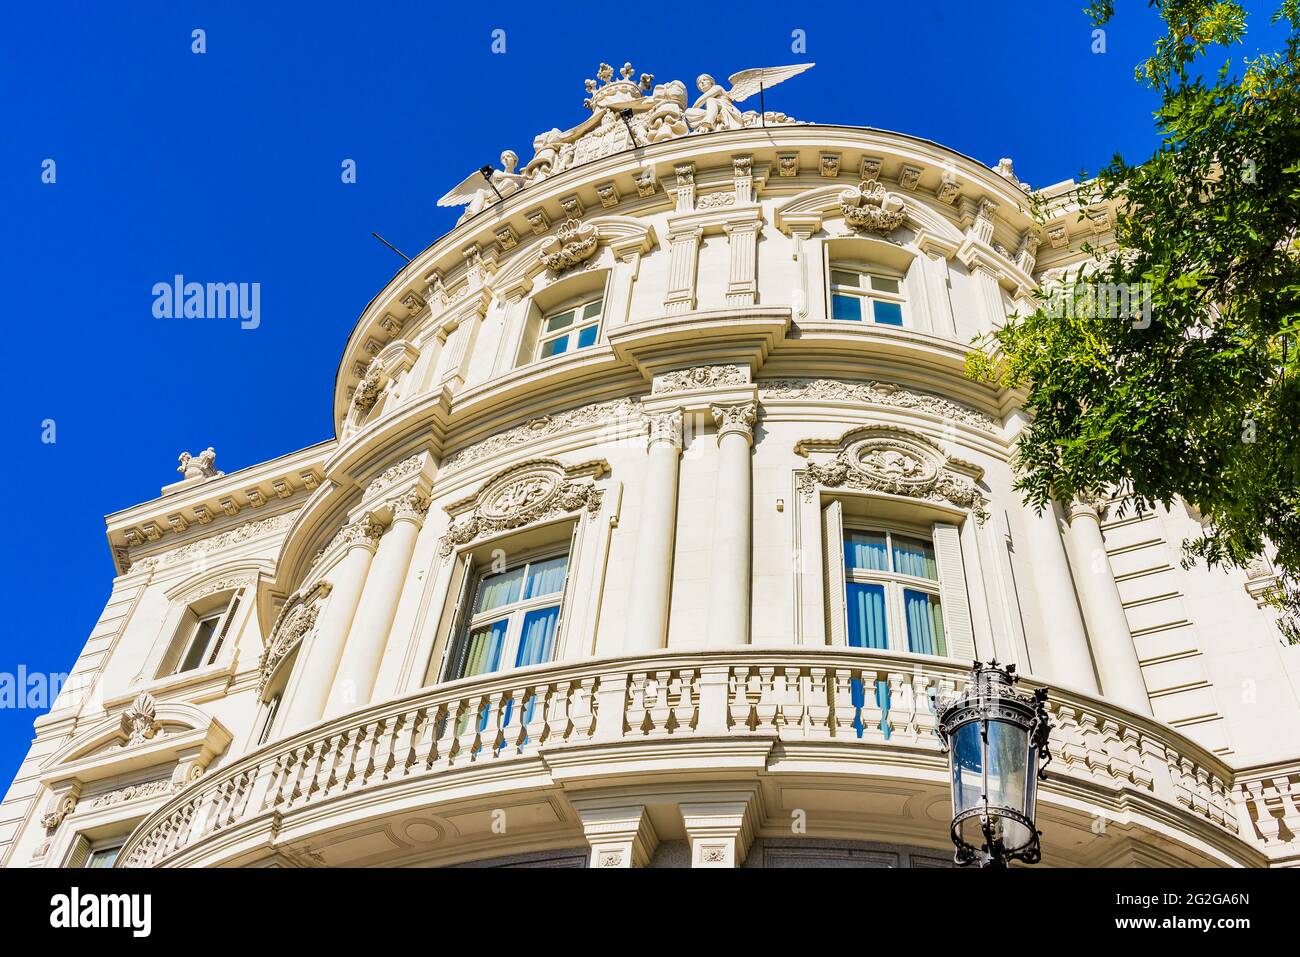 The Palace of Linares - Palacio de Linares is a palace located in Madrid, Spain. It was declared national historic-artistic monument in 1976. Located Stock Photo